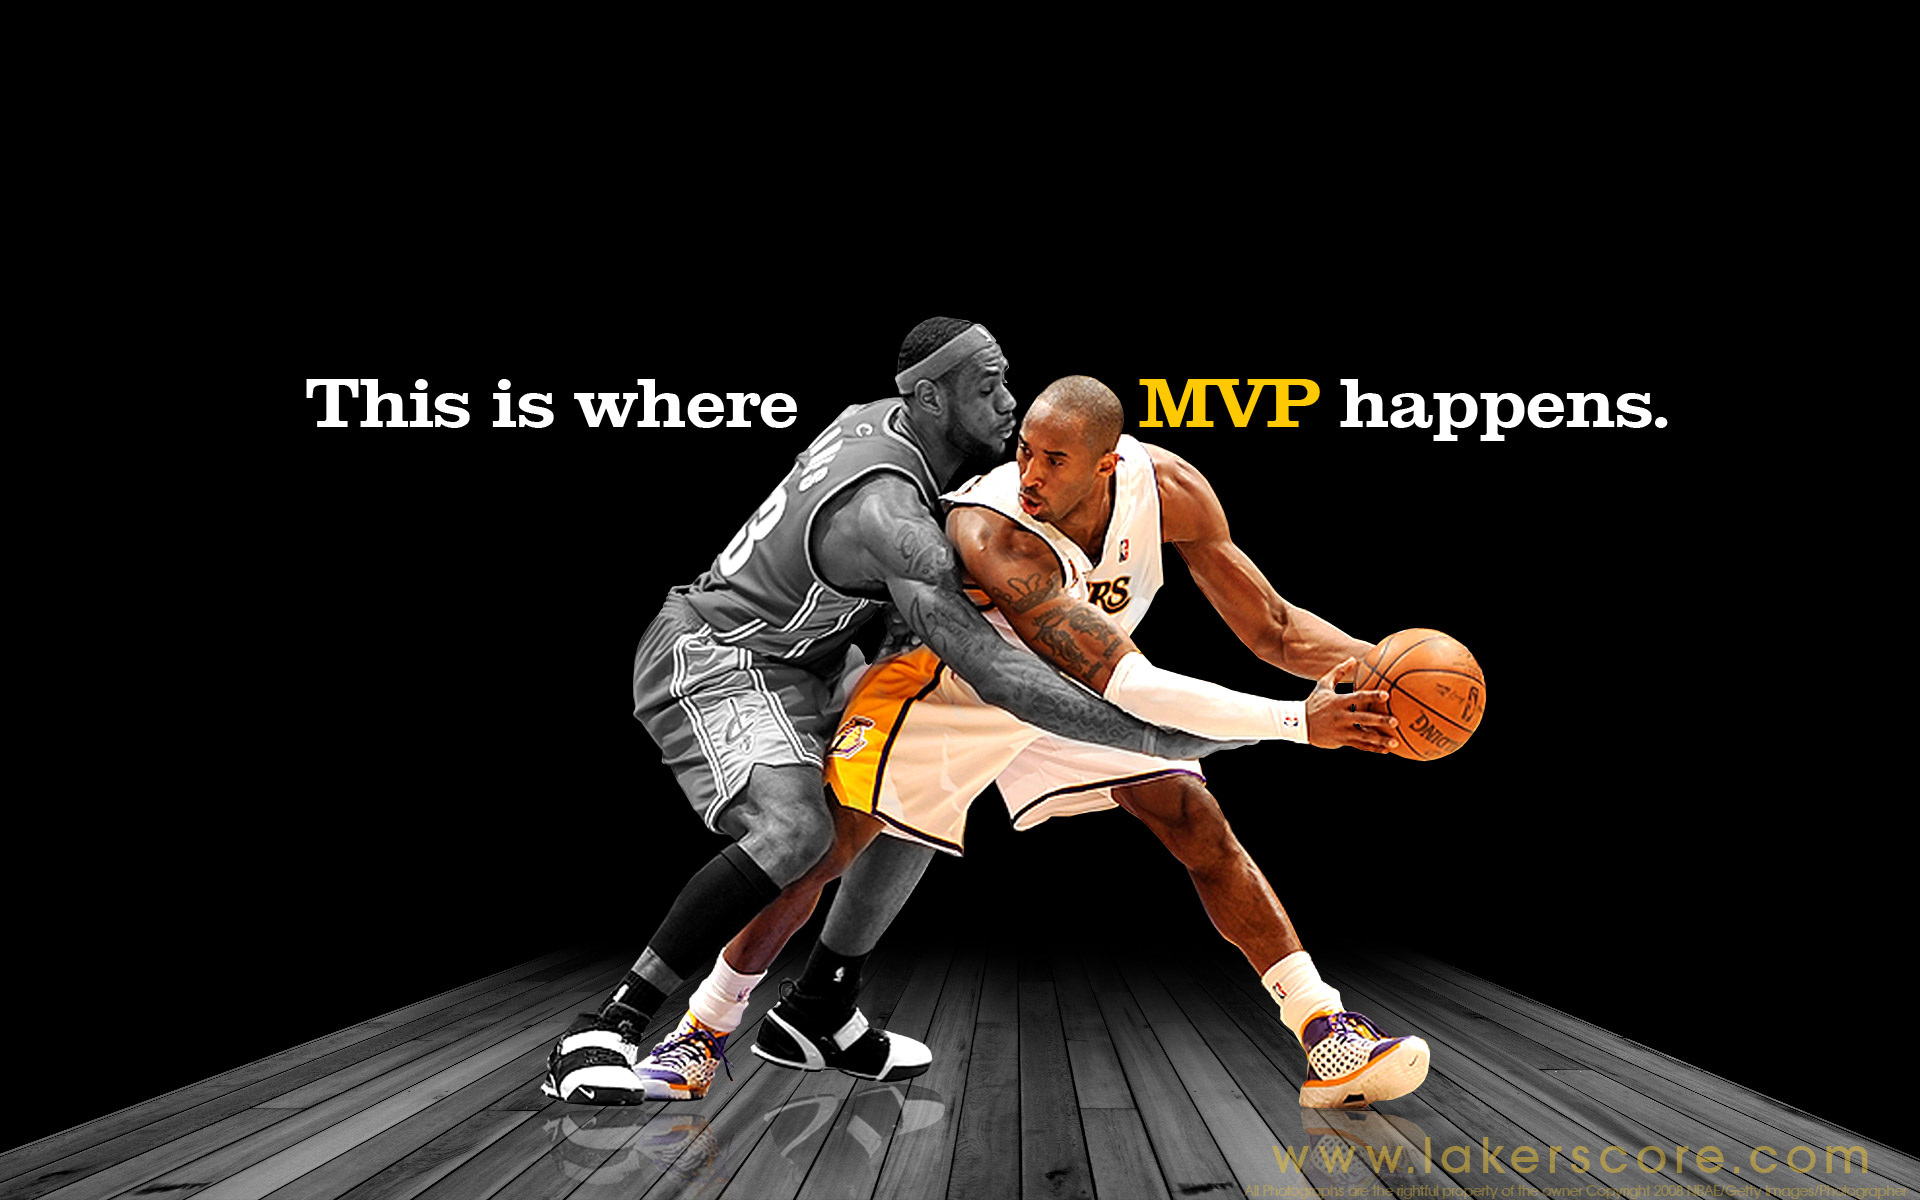 And one more wallpaper of Kobe, this time playing against LeBron James, 